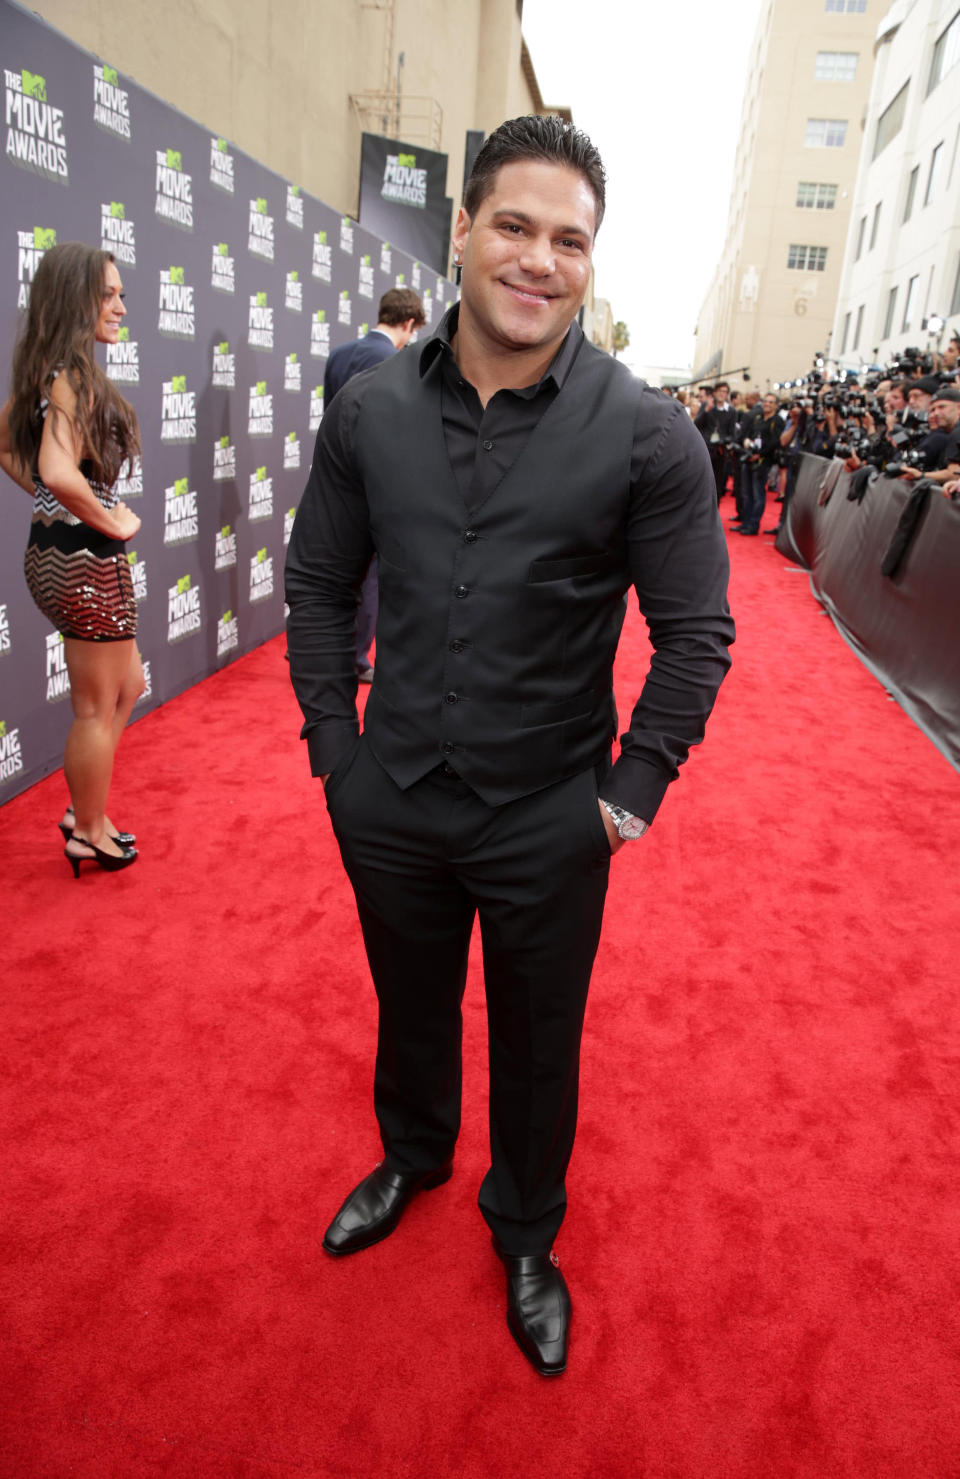 IMAGE DISTRIBUTED FOR MTV - Ronnie Ortiz-Magro arrives at the MTV Movie Awards in Sony Pictures Studio Lot in Culver City, Calif., on Sunday April 14, 2013.  (Photo by Eric Charbonneau/Invision for MTV/AP Images)